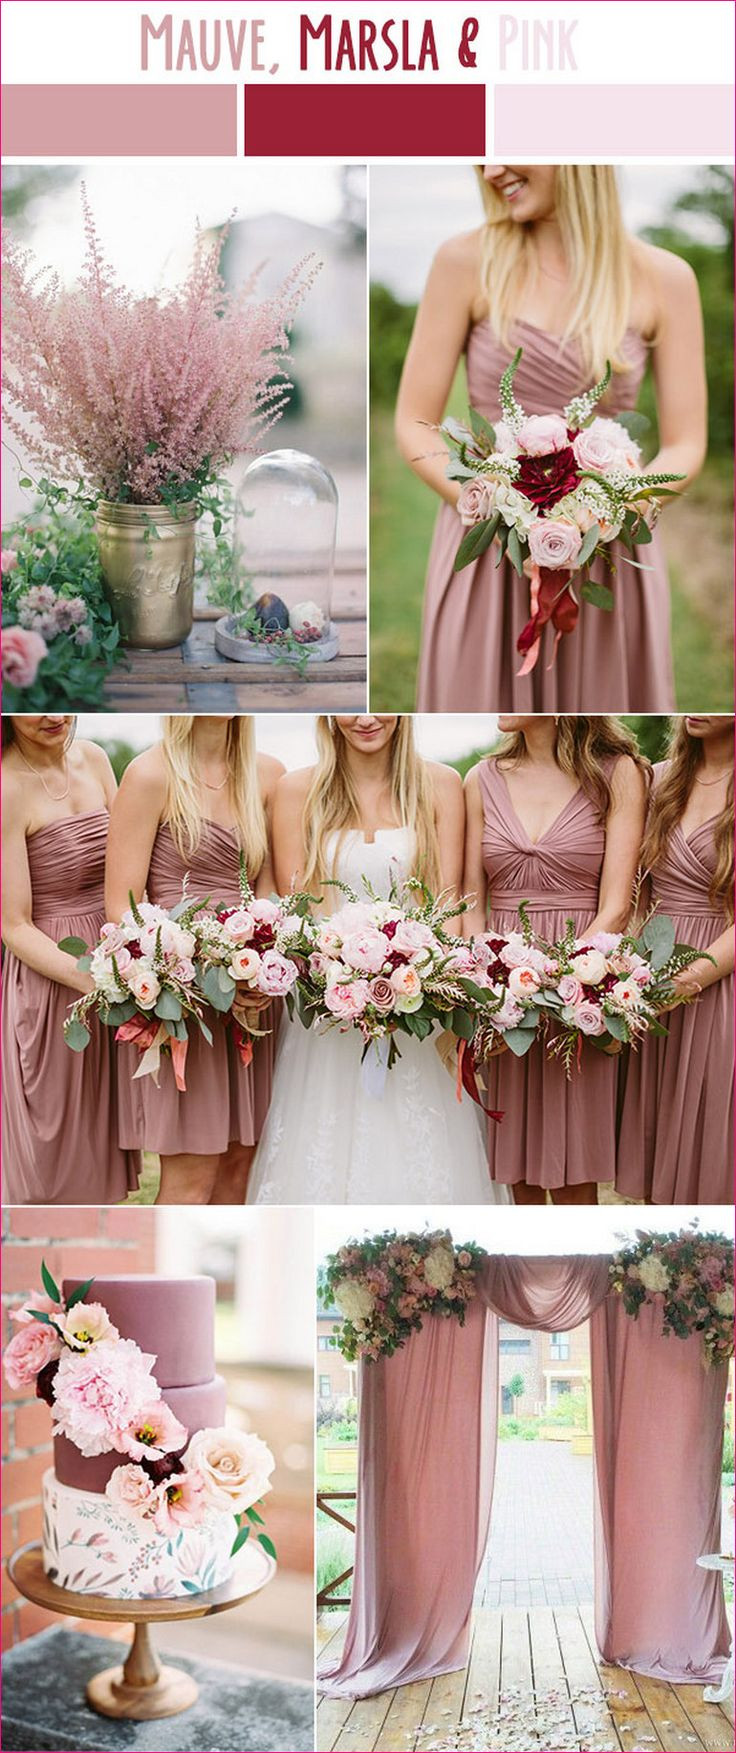 Wedding Color Ideas For Spring
 Best 25 Spring wedding colors ideas on Pinterest